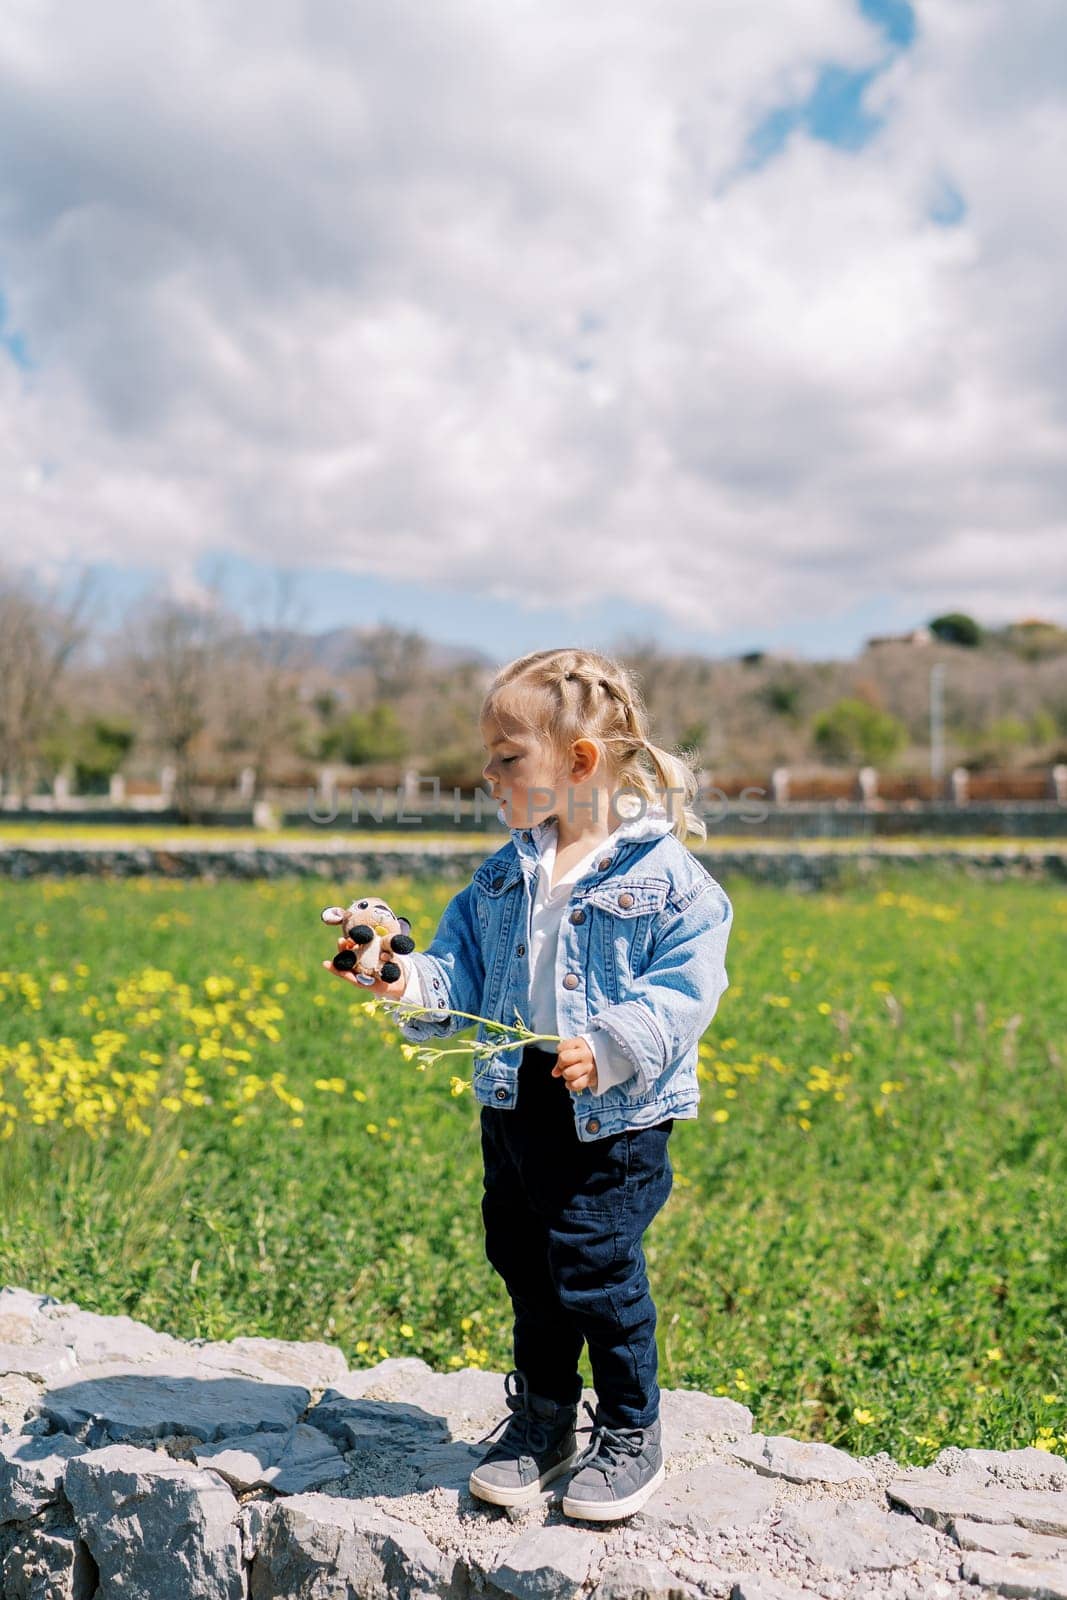 Little girl with a wildflower stands on a stone fence in a meadow and looks at a soft toy in her hand. High quality photo